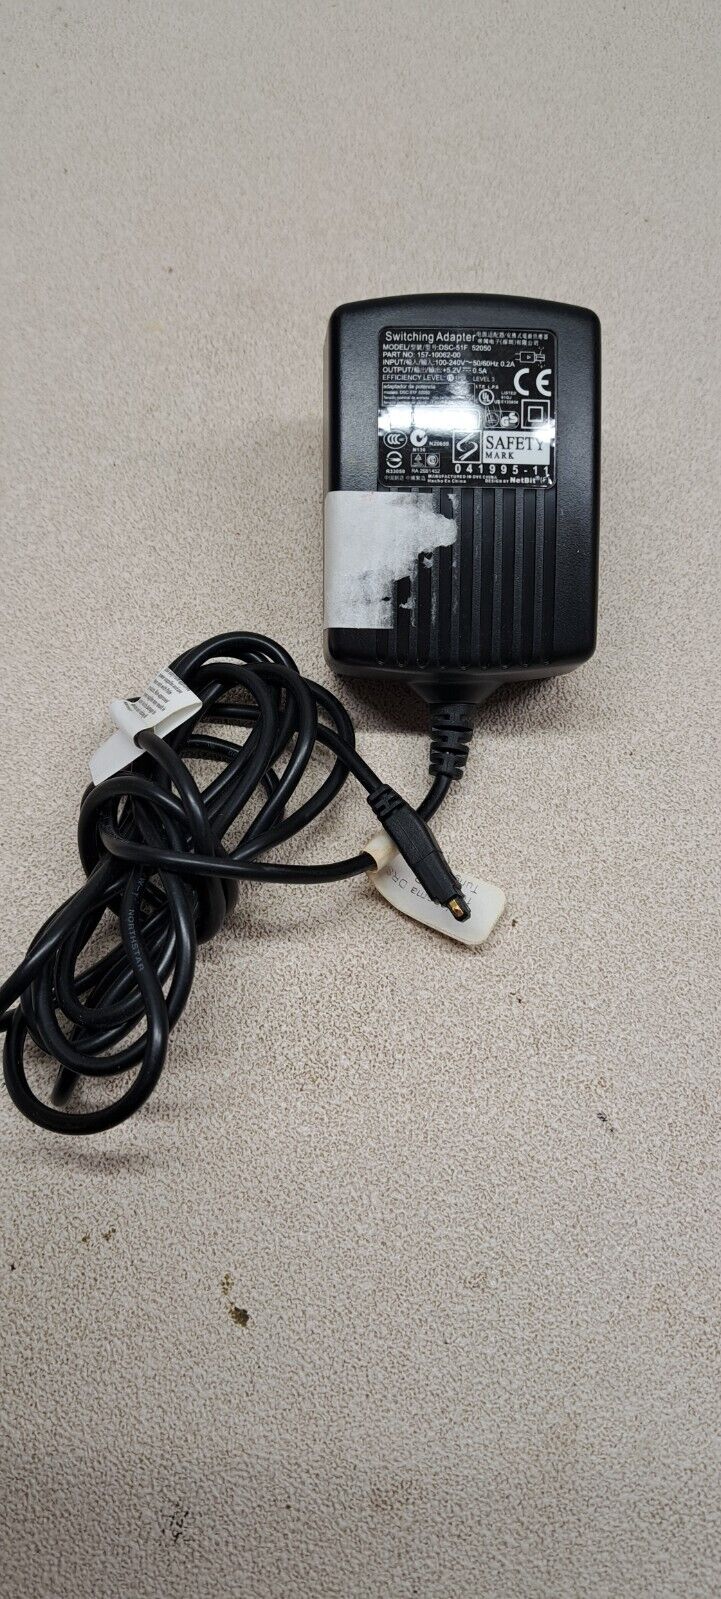 Genuine Palm Dsc-51f Switching Adapter - Output 5.2vdc 0.5a - P/n 157-10062-00